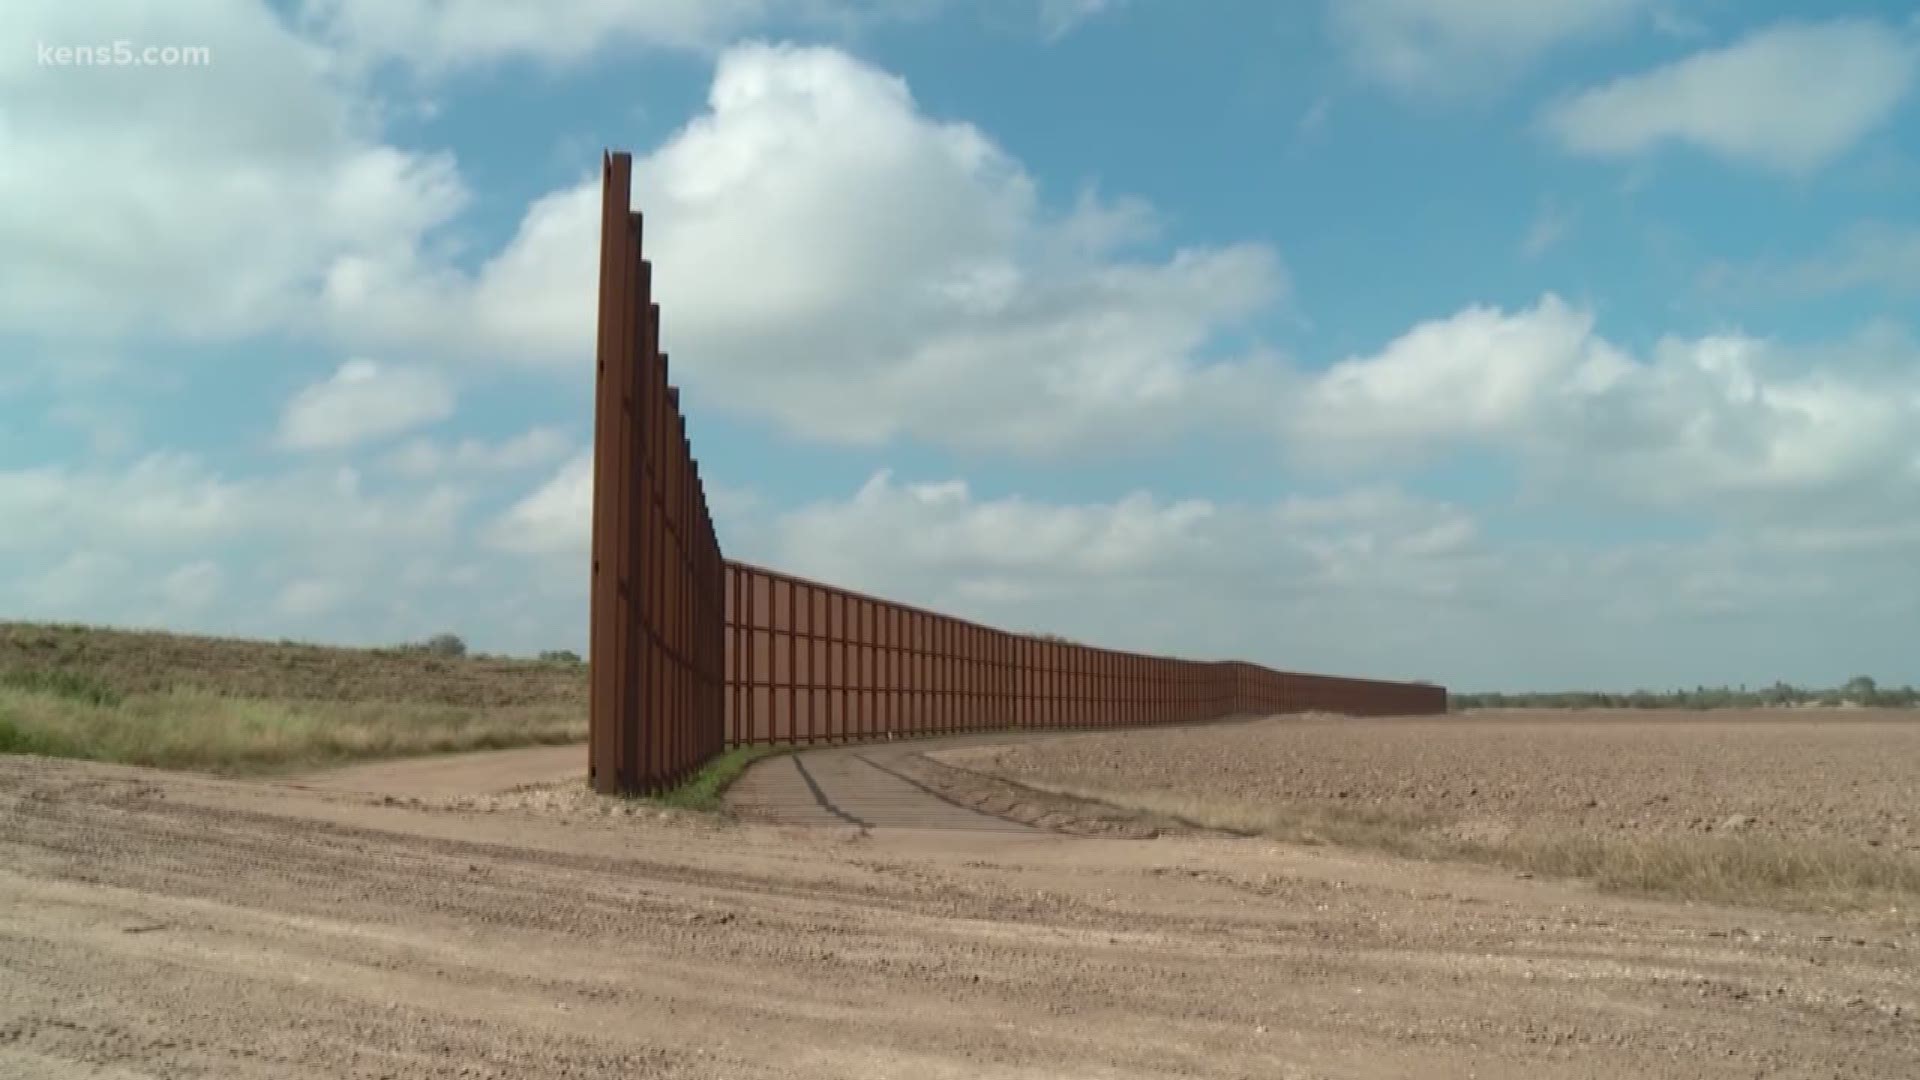 Friday was the start date on a multi-million dollar project to close gaps along the existing border fence in South Texas.